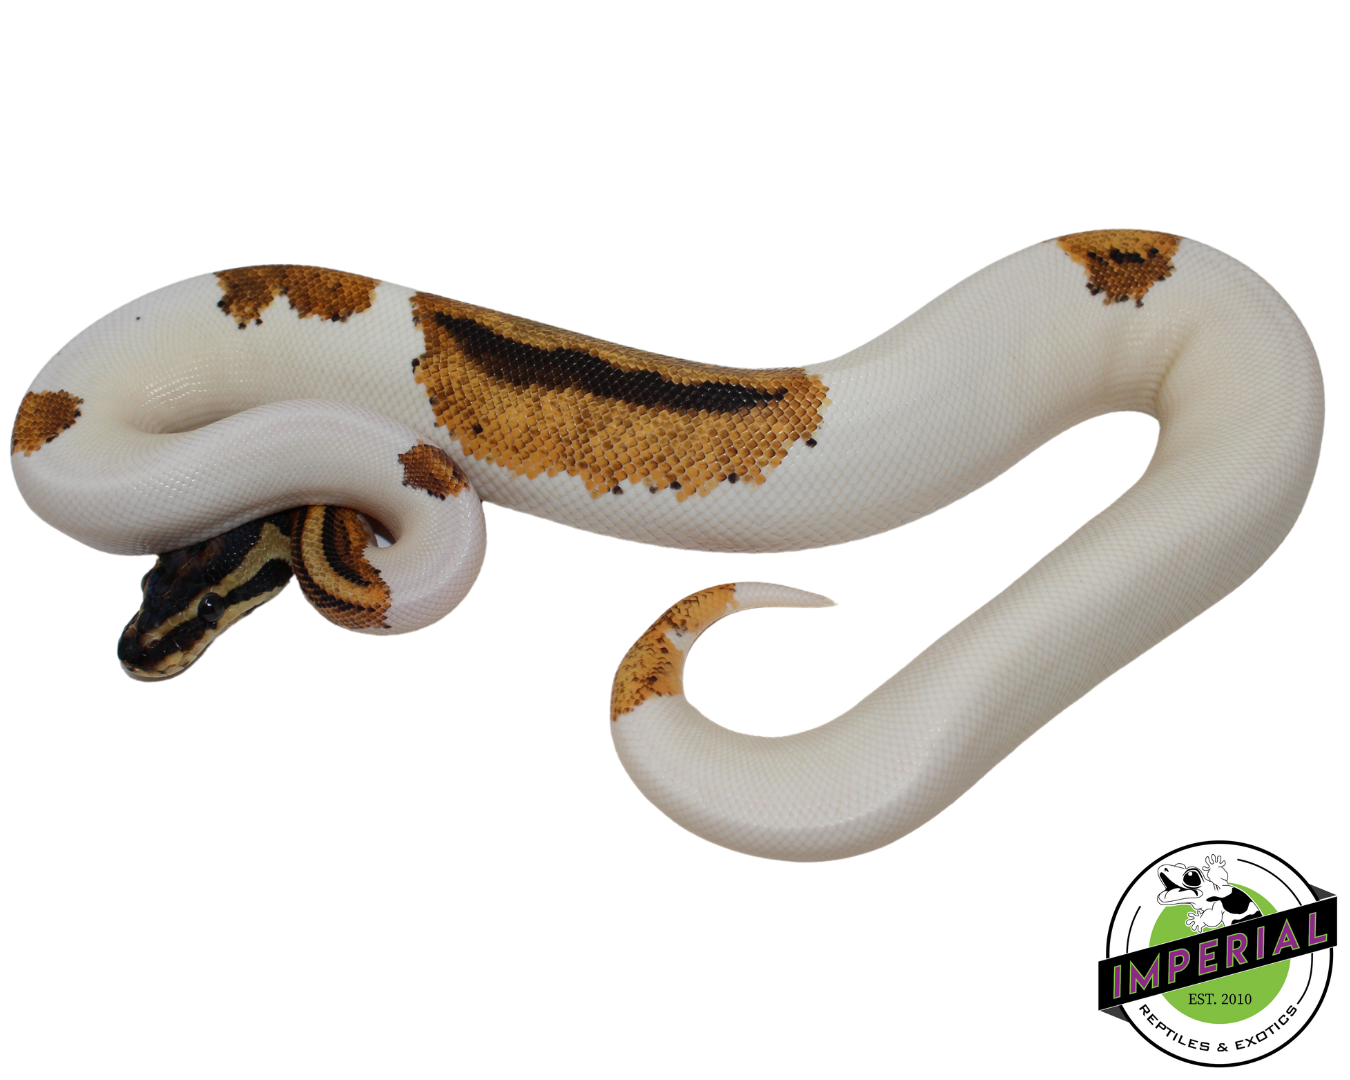 Orange Dream Yellowbelly Piebald Ball Python for sale, reptiles for sale, buy reptiles online